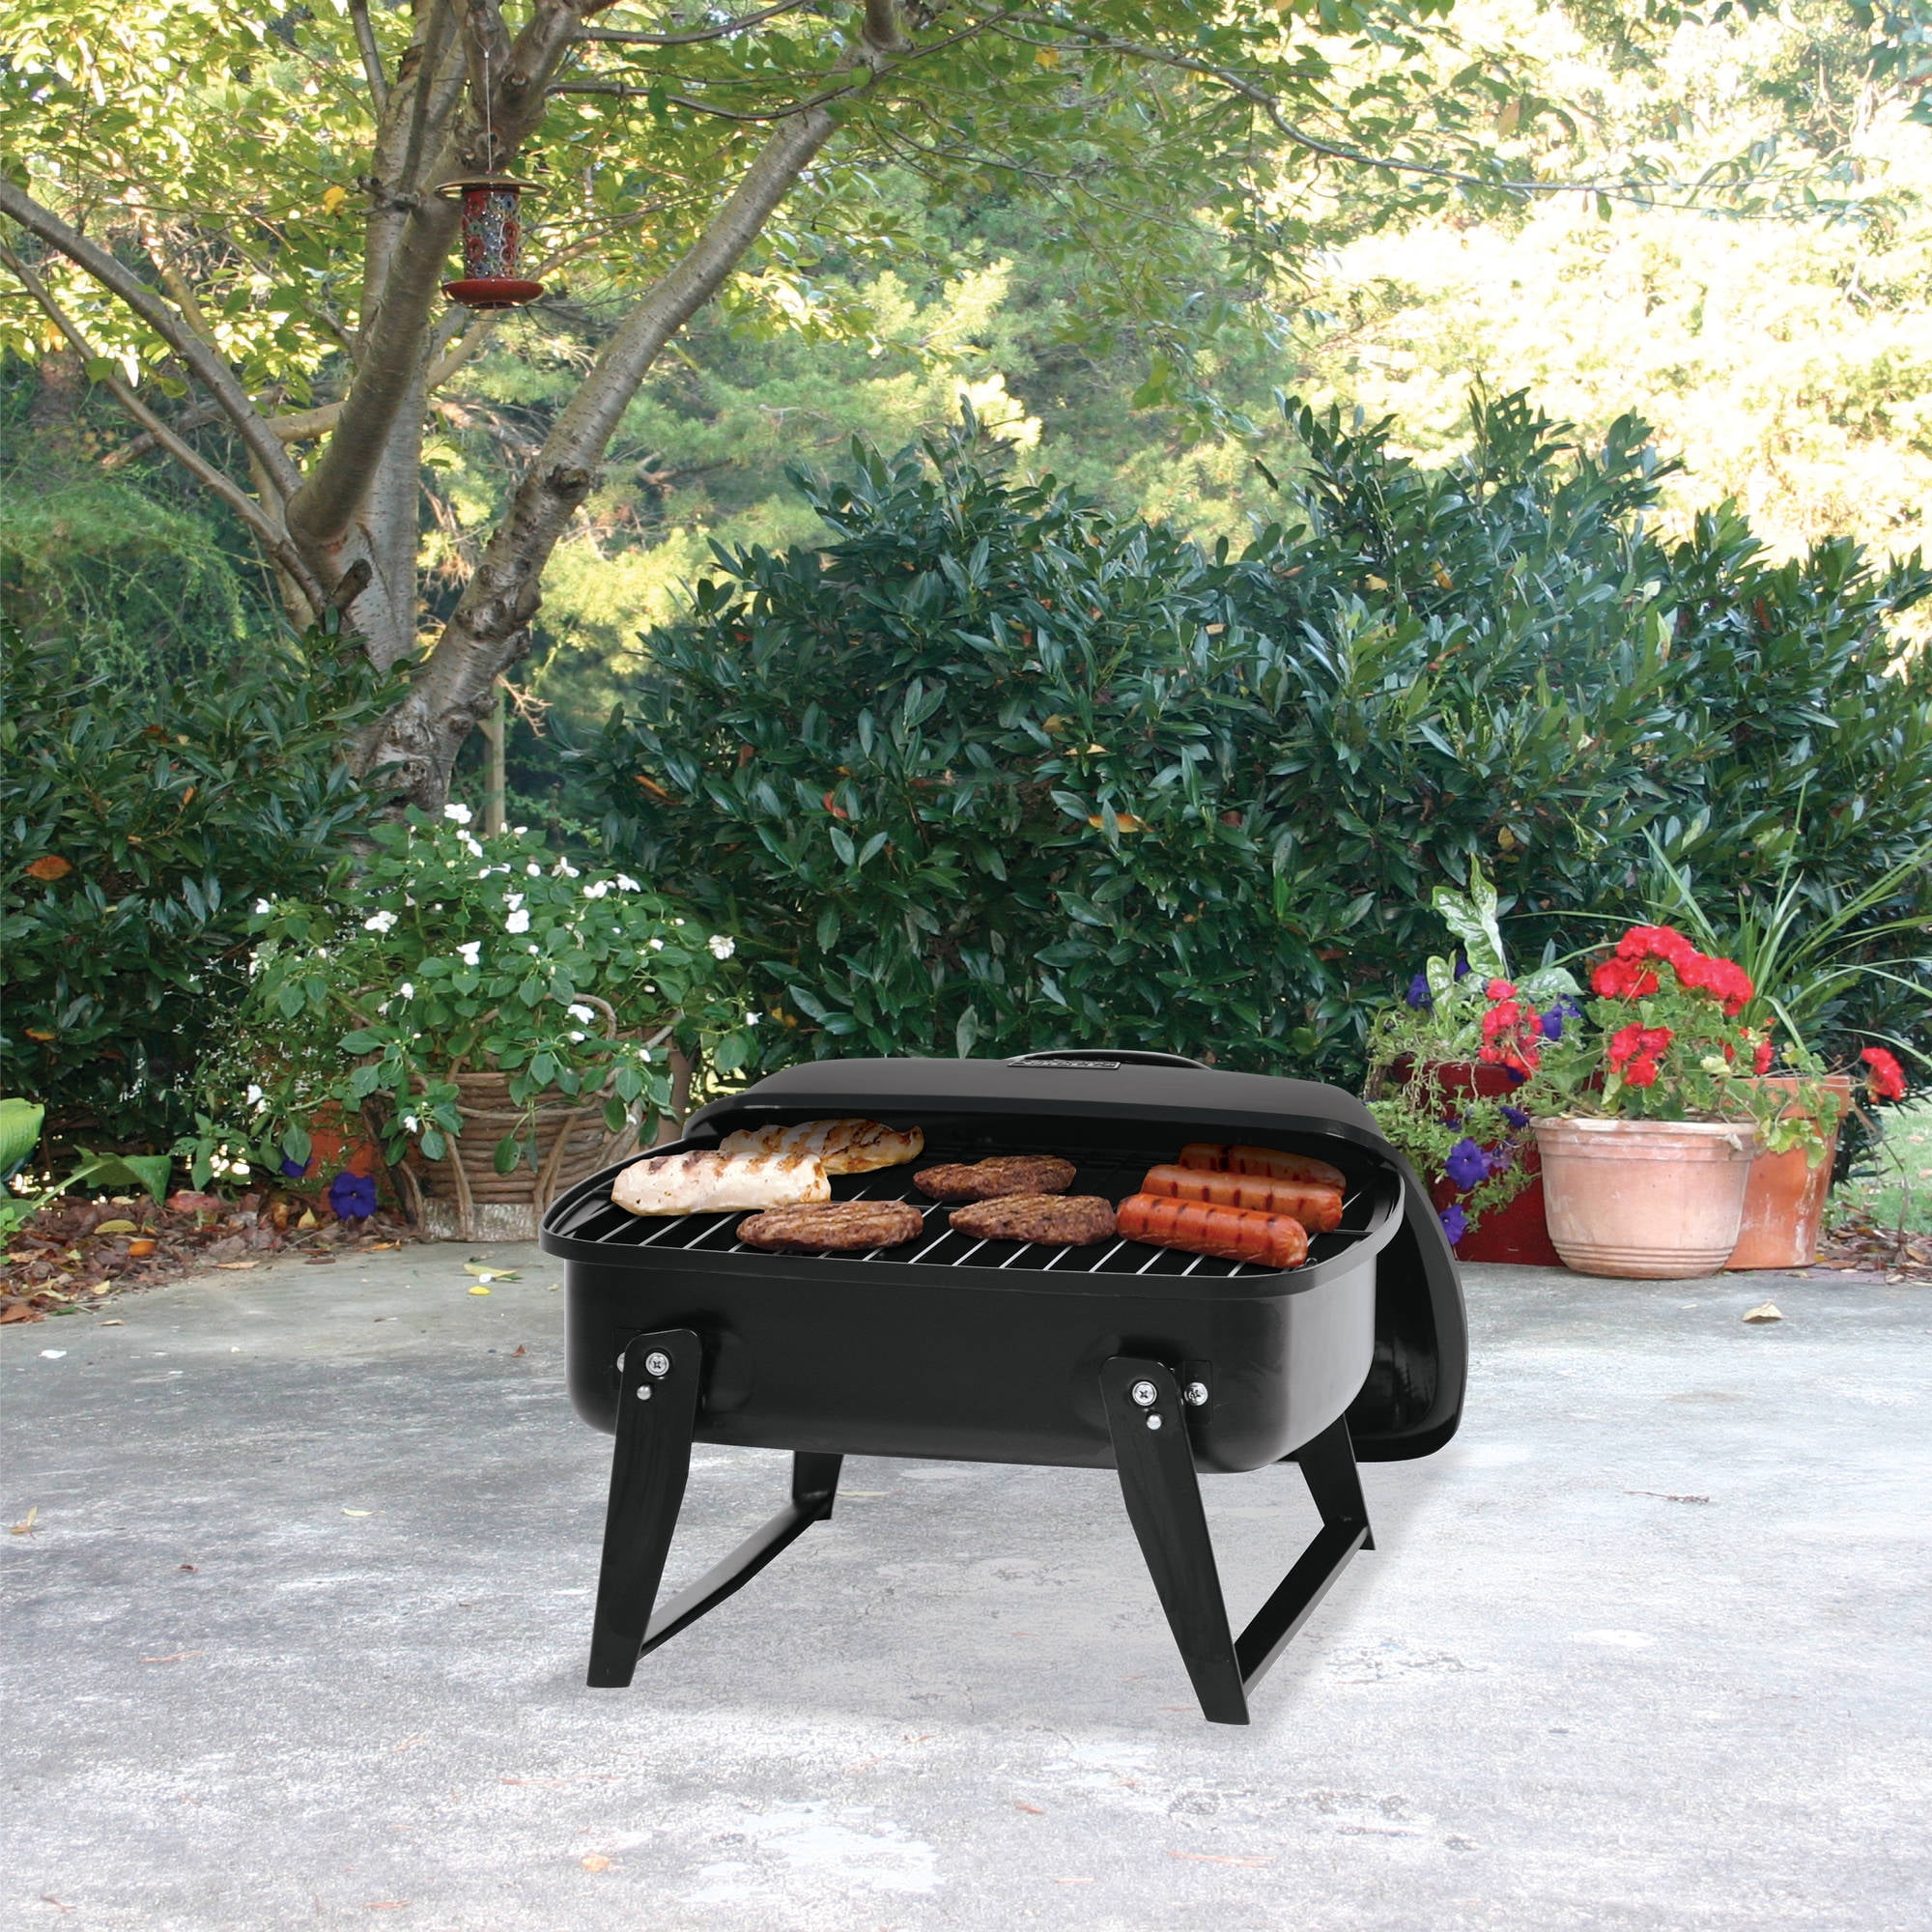 Portable Charcoal Grill Walmart  www.imgkid.com  The Image Kid Has It!